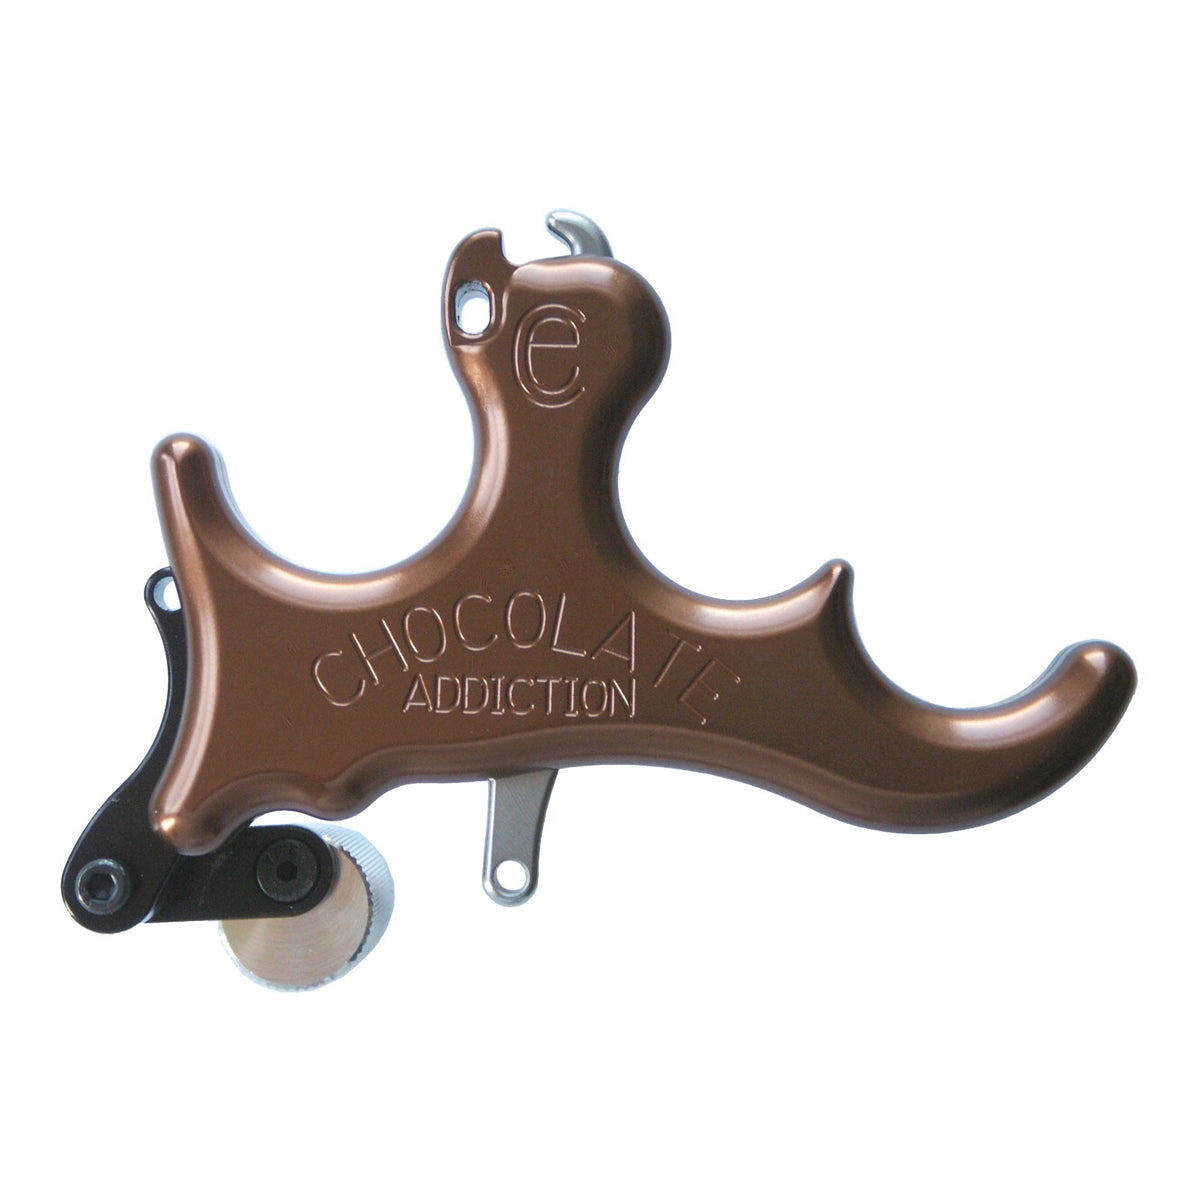 Carter Chocolate Addiction 3 Finger Release in Carter Chocolate Addiction 3 Finger Release by Carter Releases | Archery - goHUNT Shop by GOHUNT | Carter Releases - GOHUNT Shop